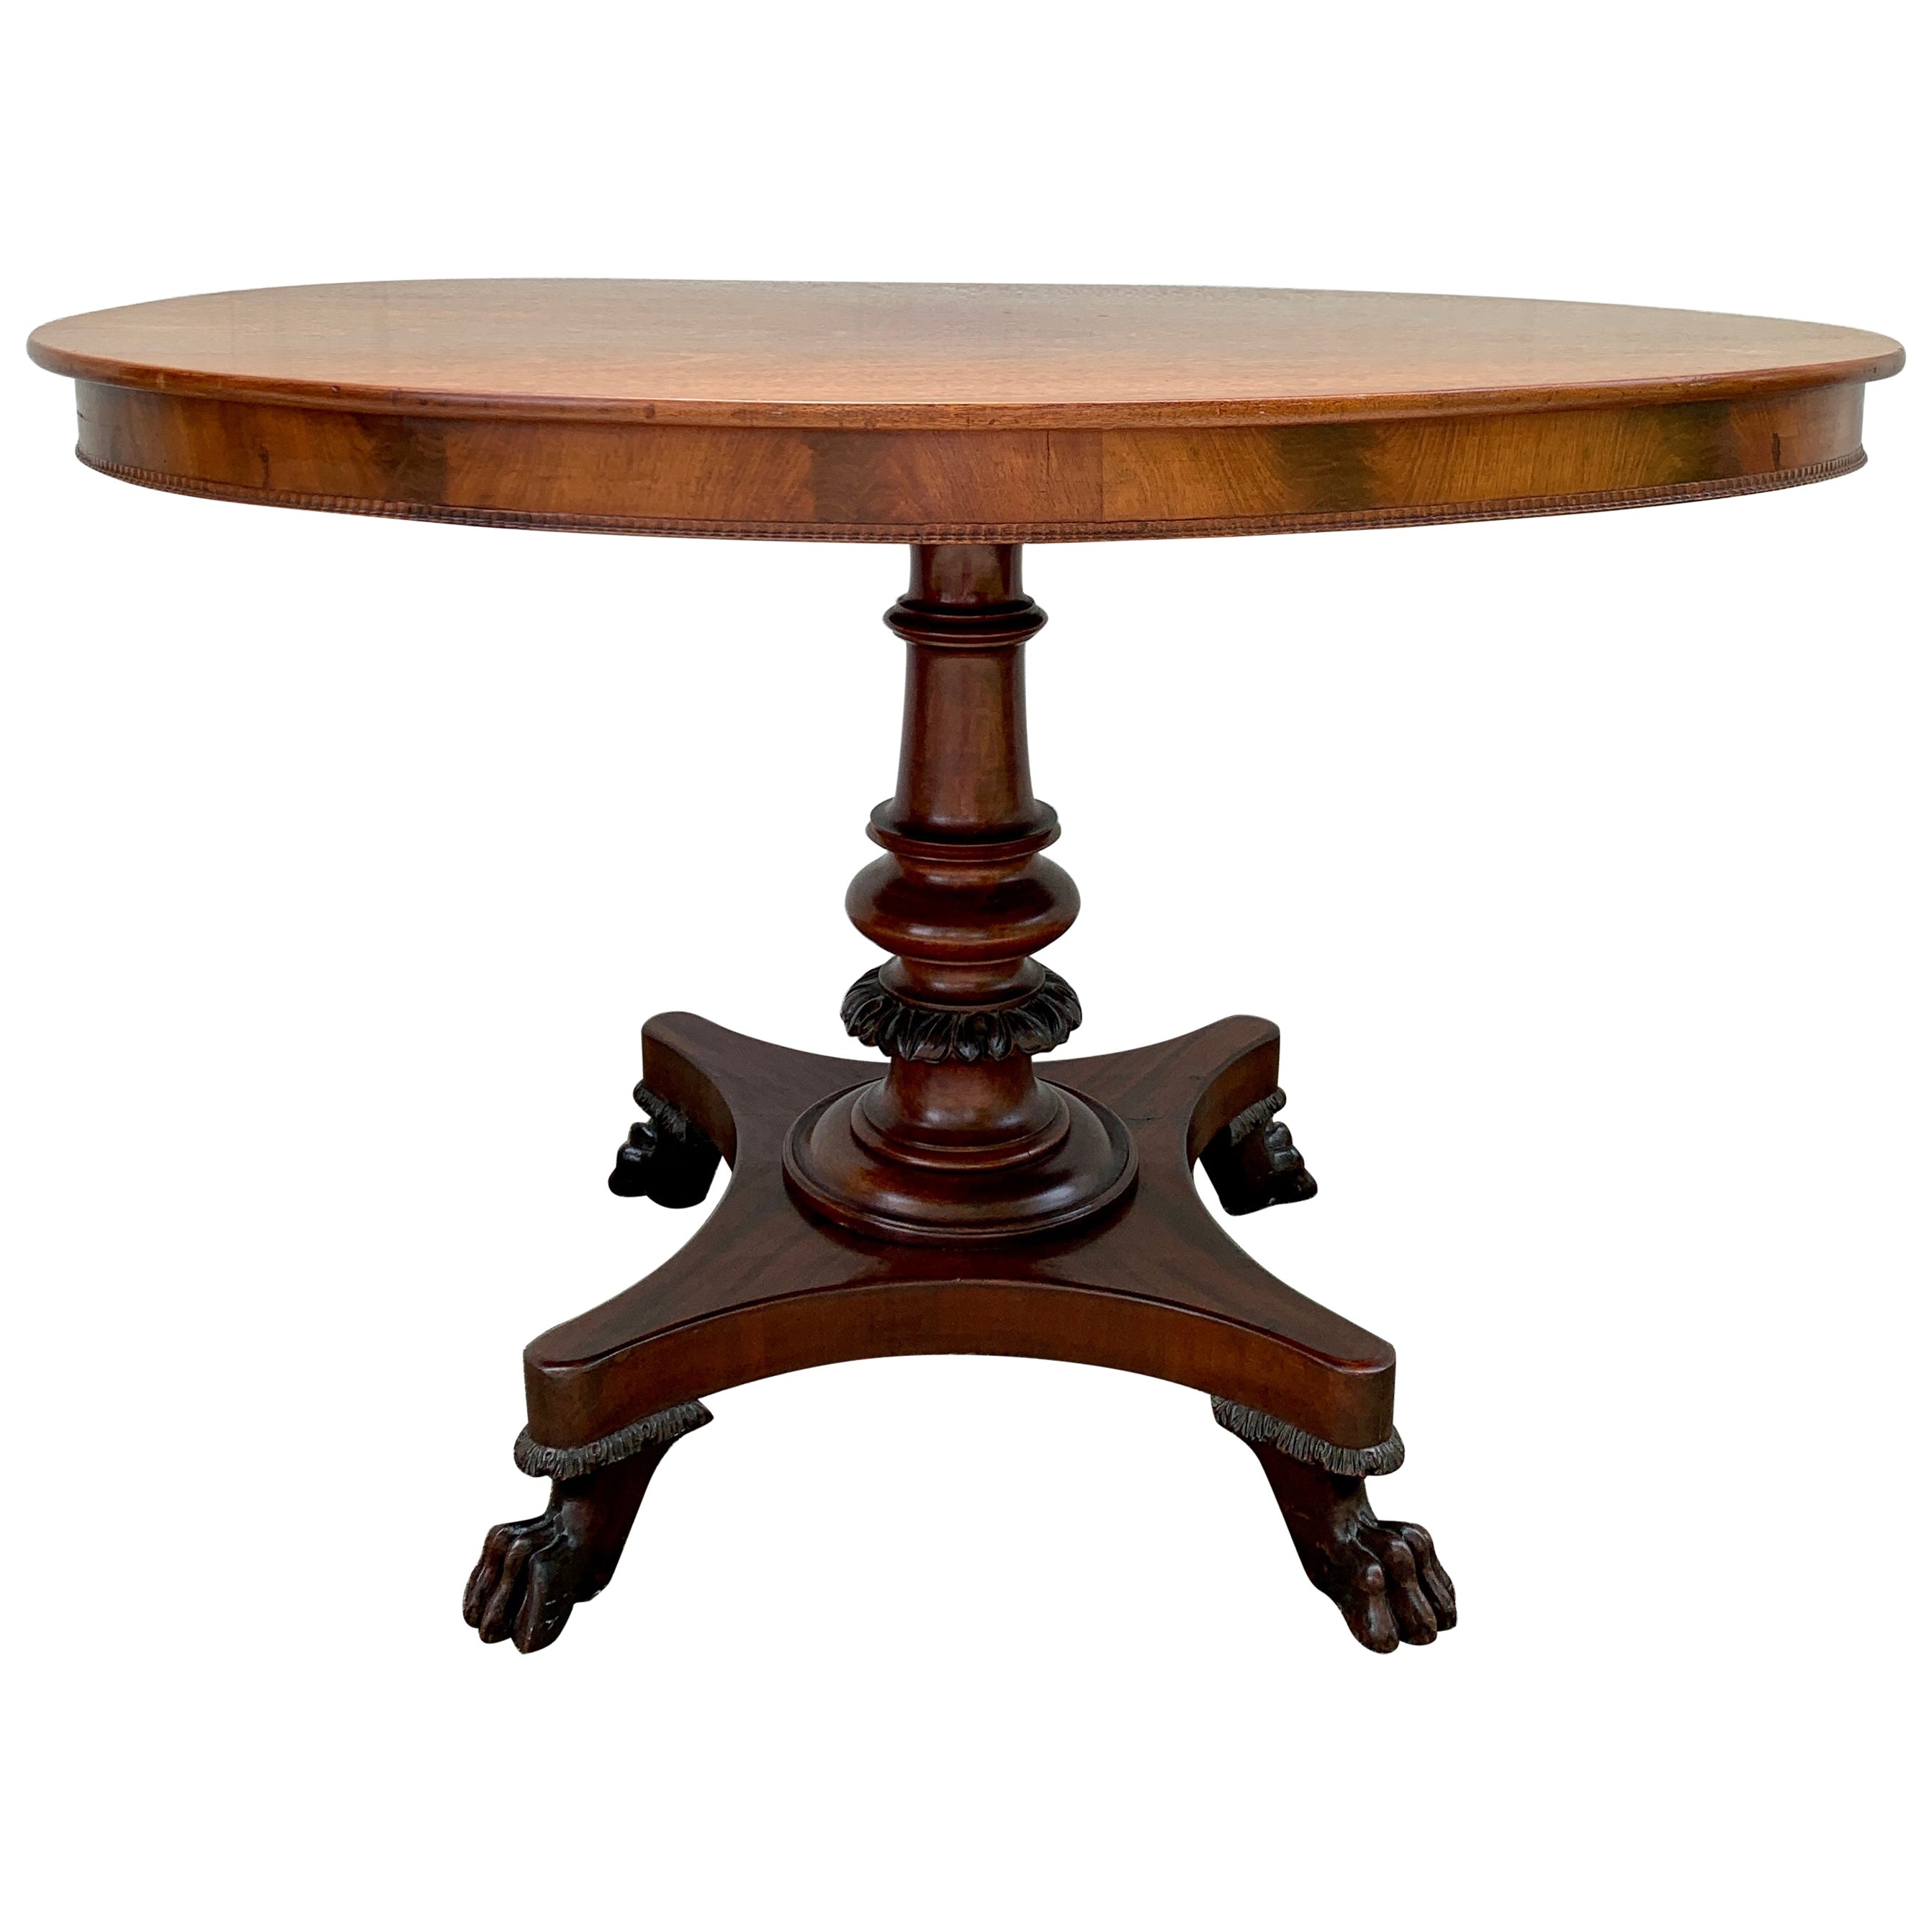 Antique American Empire Mahogany Paw Foot Pedestal Center Table For Sale